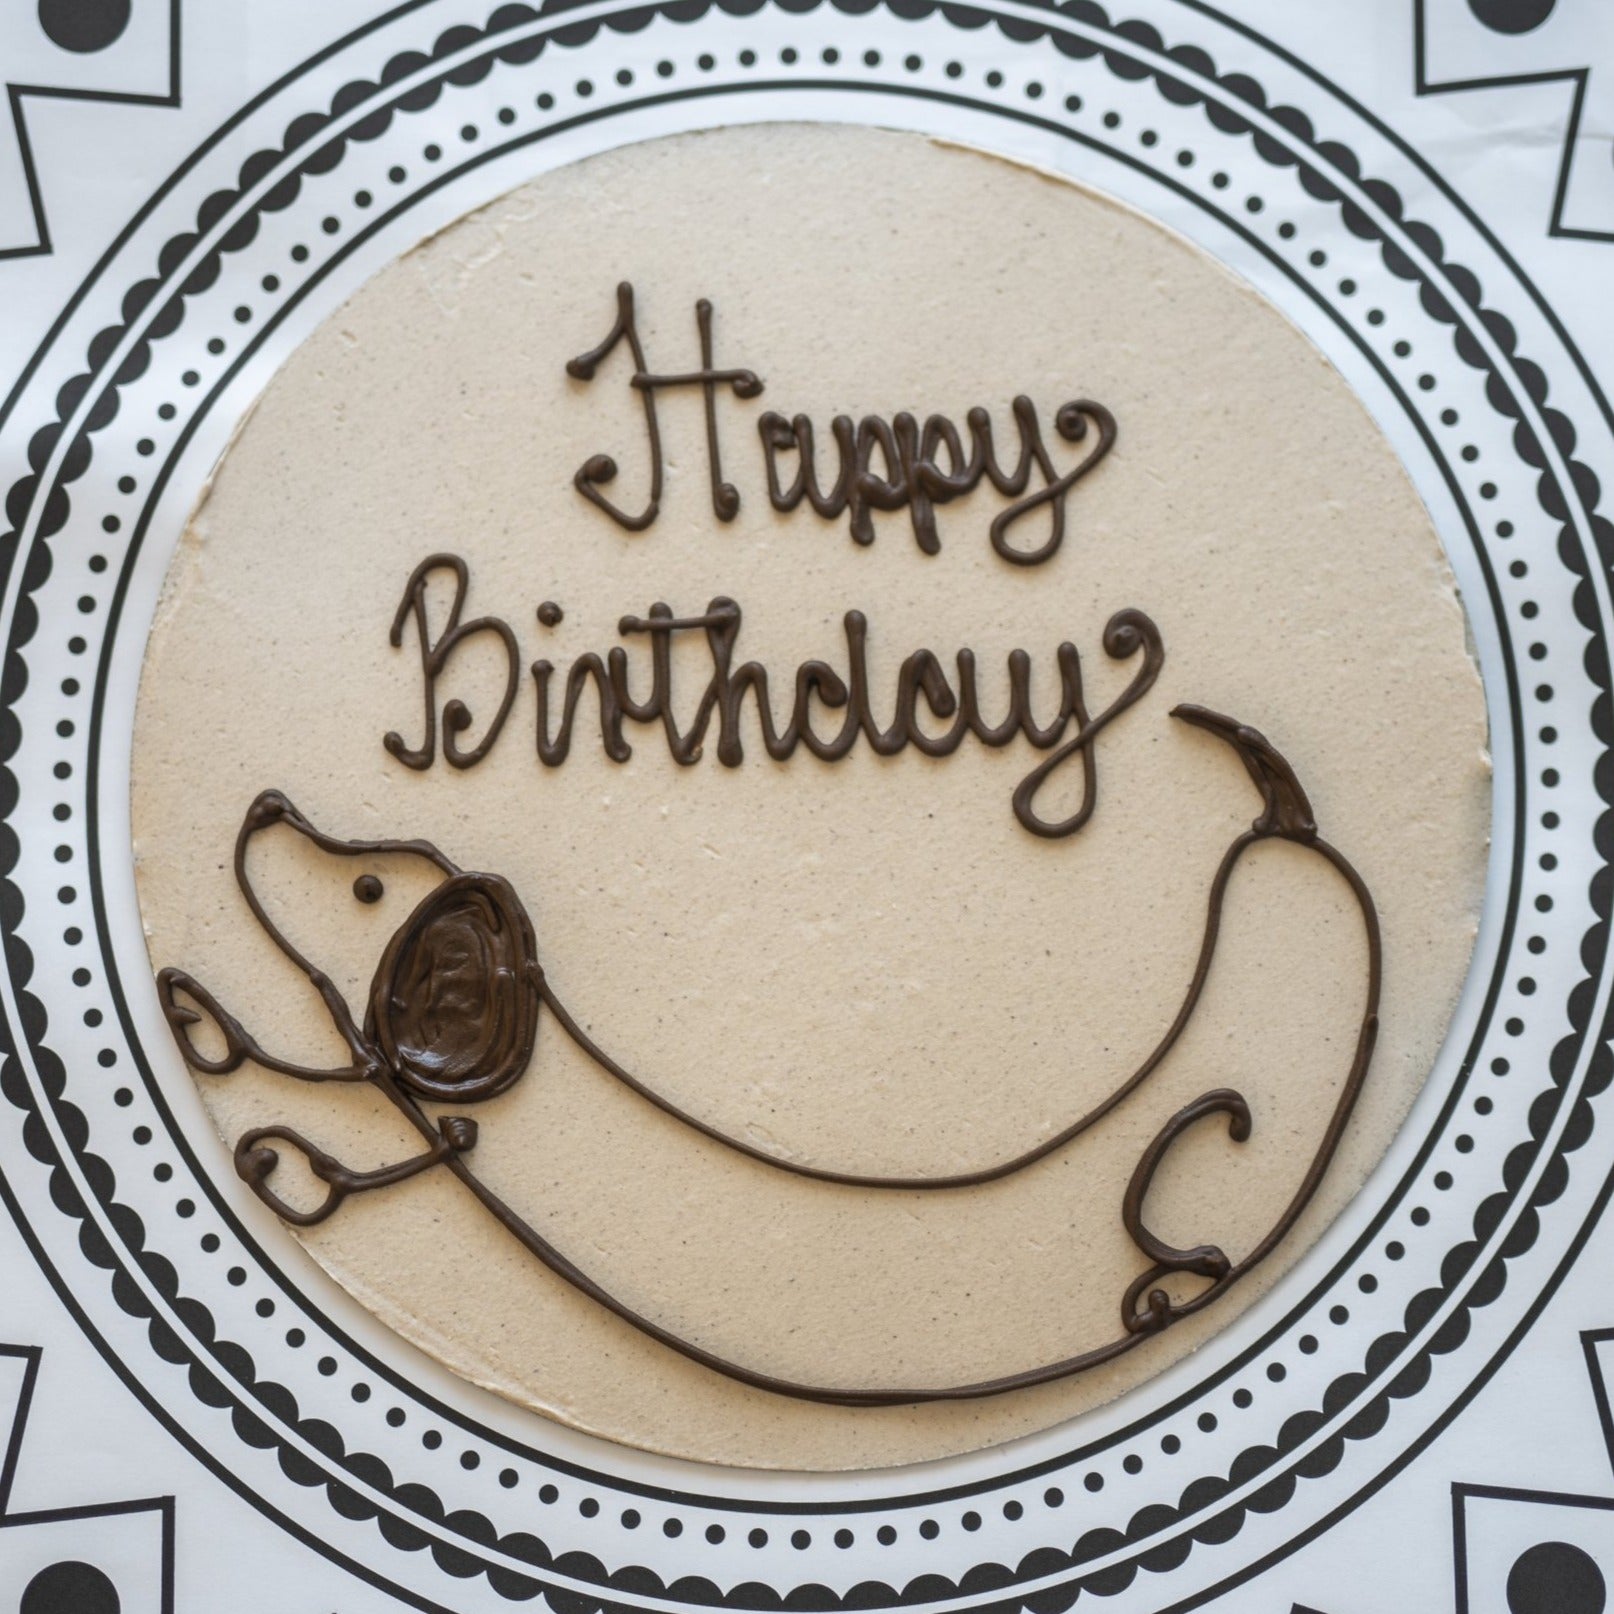 Personalised Frosted Victoria Cake - Jack and Beyond